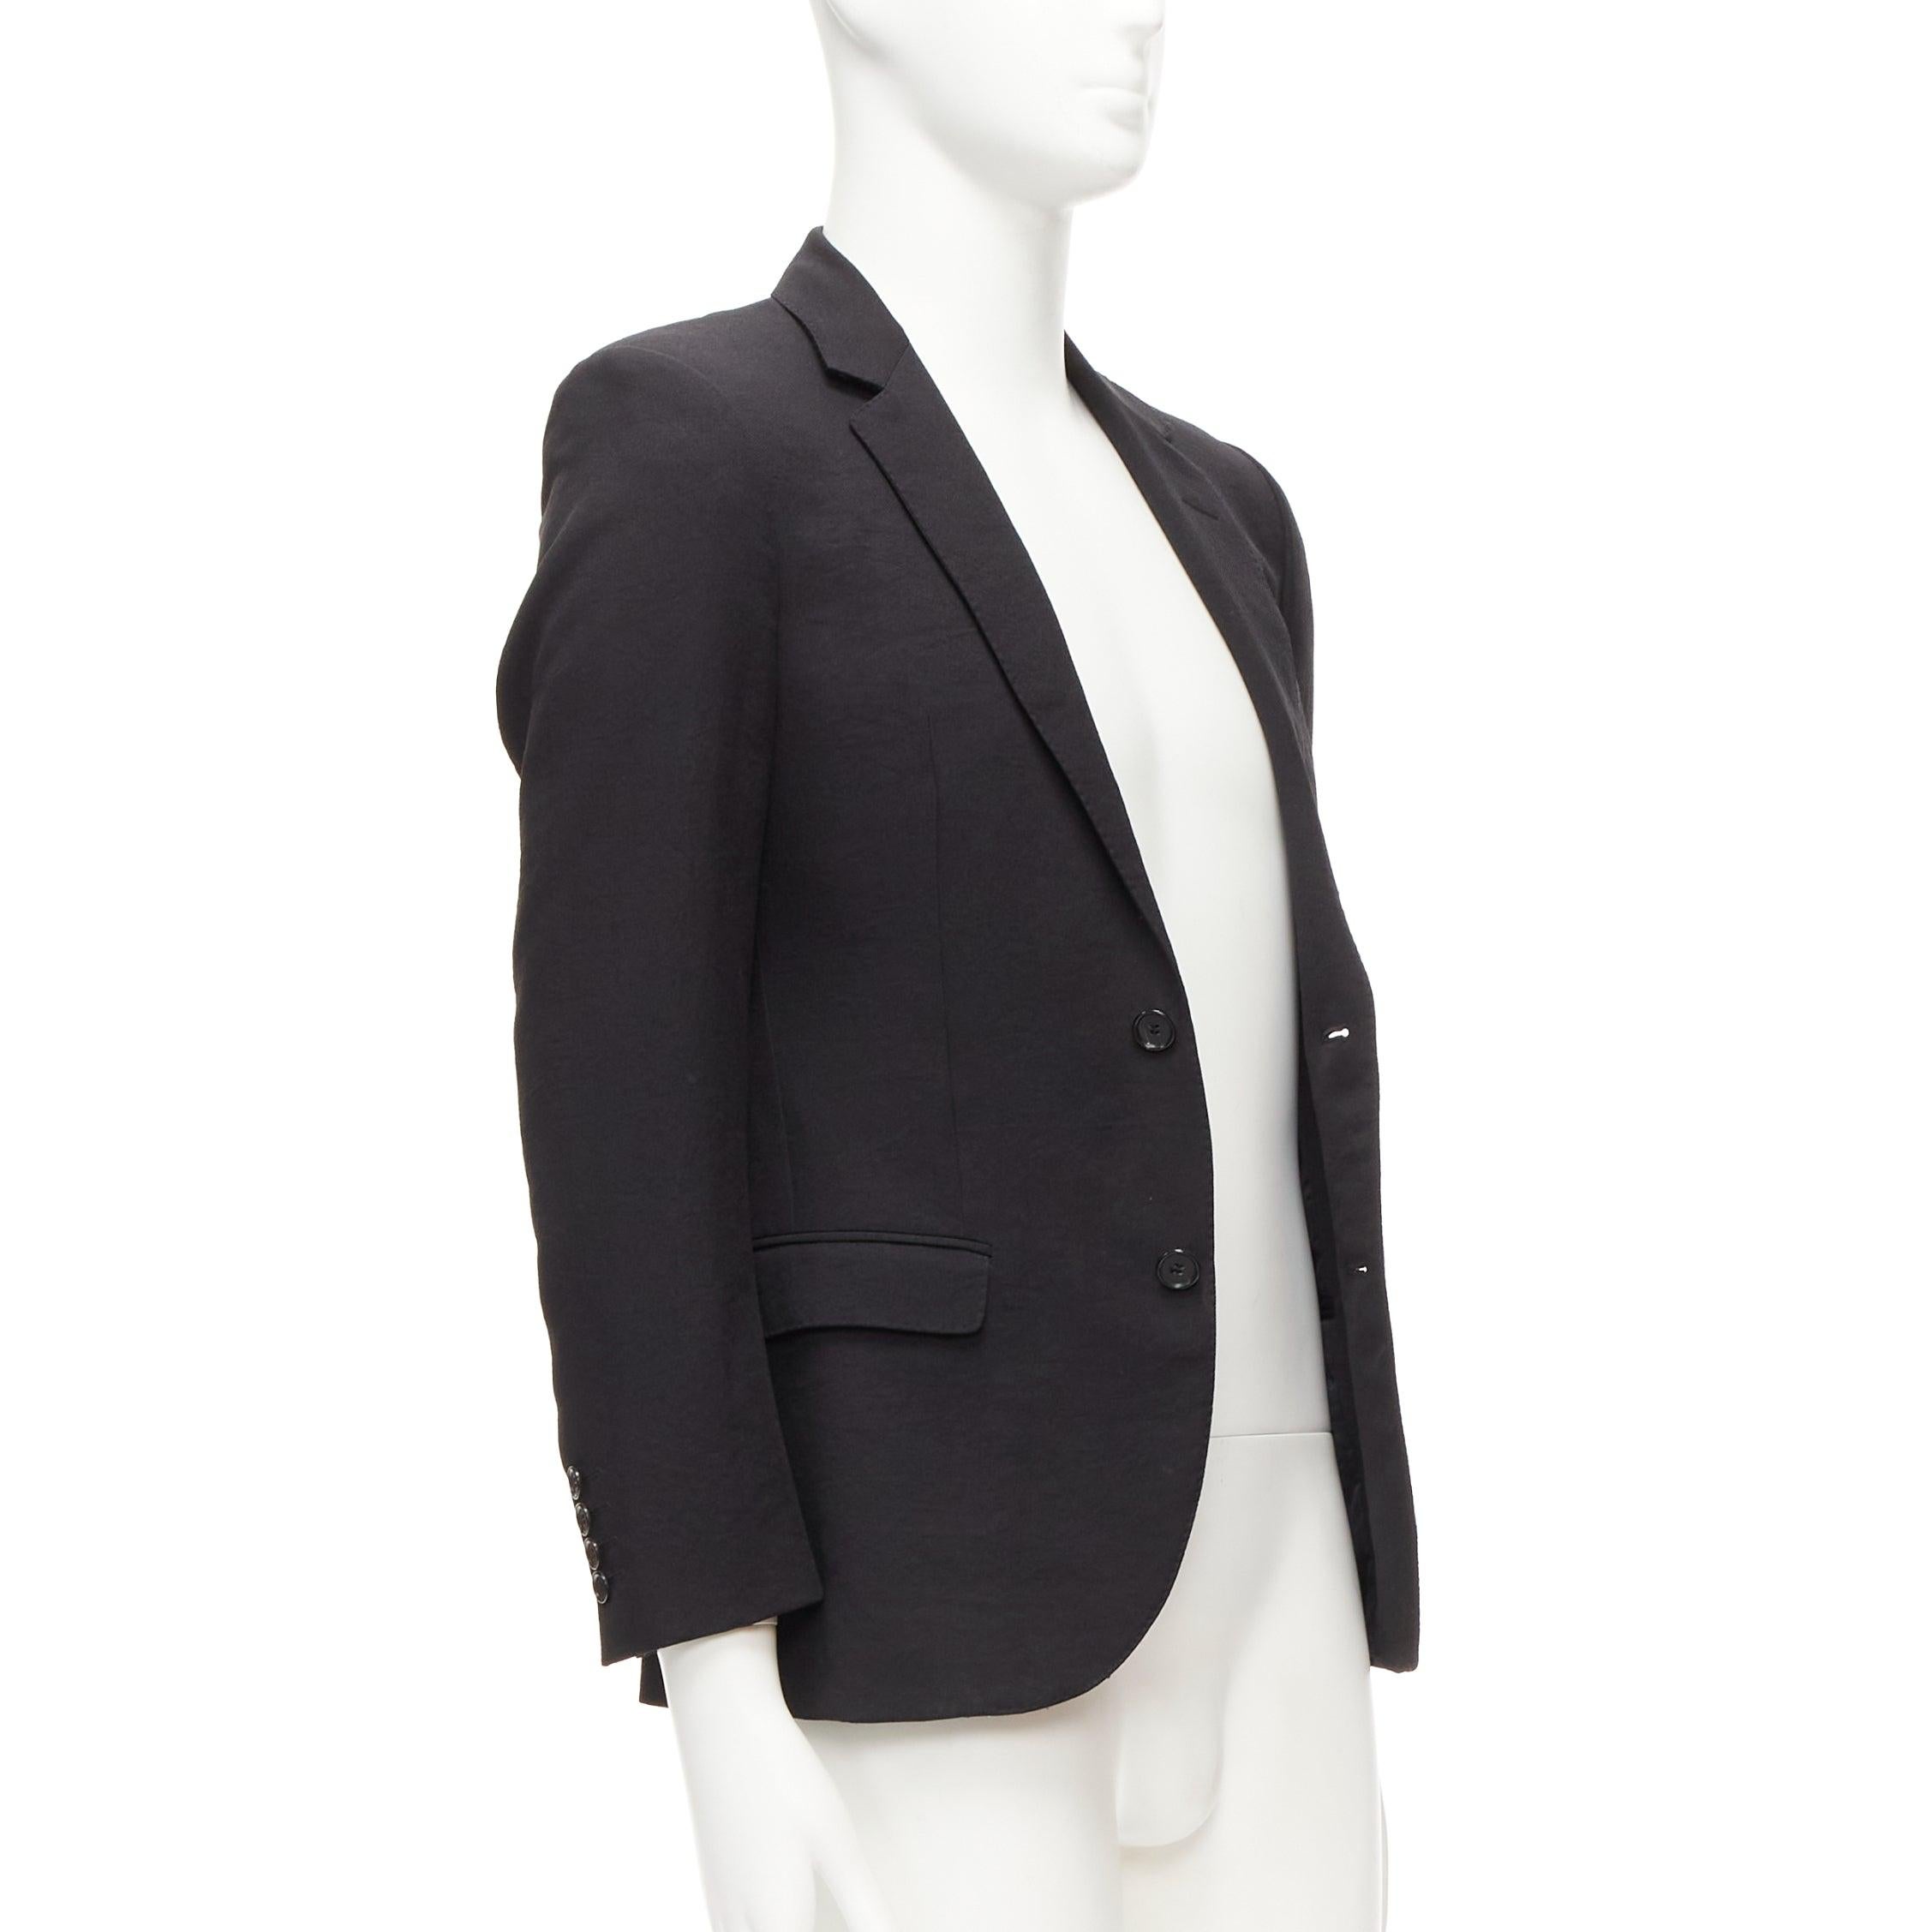 LANVIN black waffle low shine single breast minimal suit blazer EU44 XS
Reference: CNLE/A00255
Brand: Lanvin
Designer: Alber Elbaz
Material: Polyester
Color: Black
Pattern: Solid
Closure: Button
Lining: Black Fabric
Extra Details: Single vent